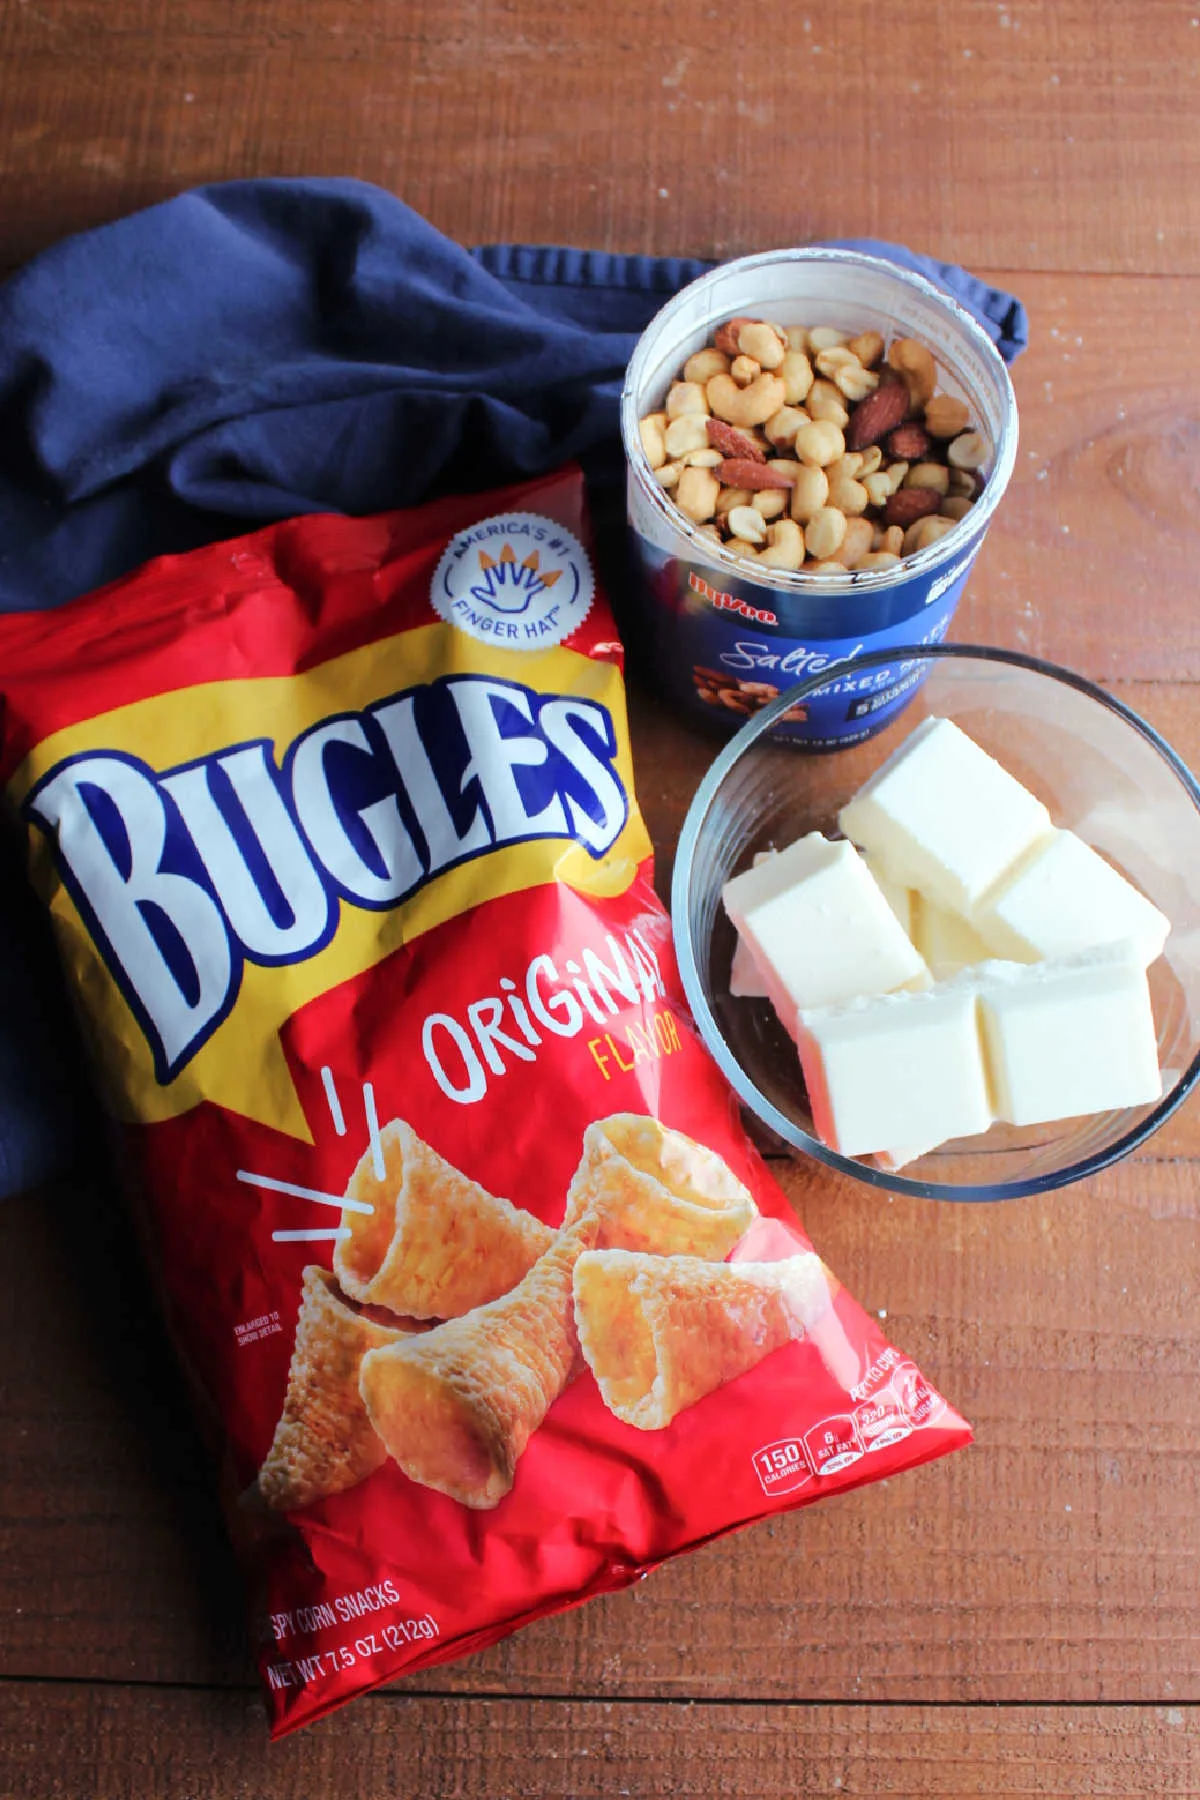 Ingredients ready to be made into white chocolate coated bugles with mixed nuts.